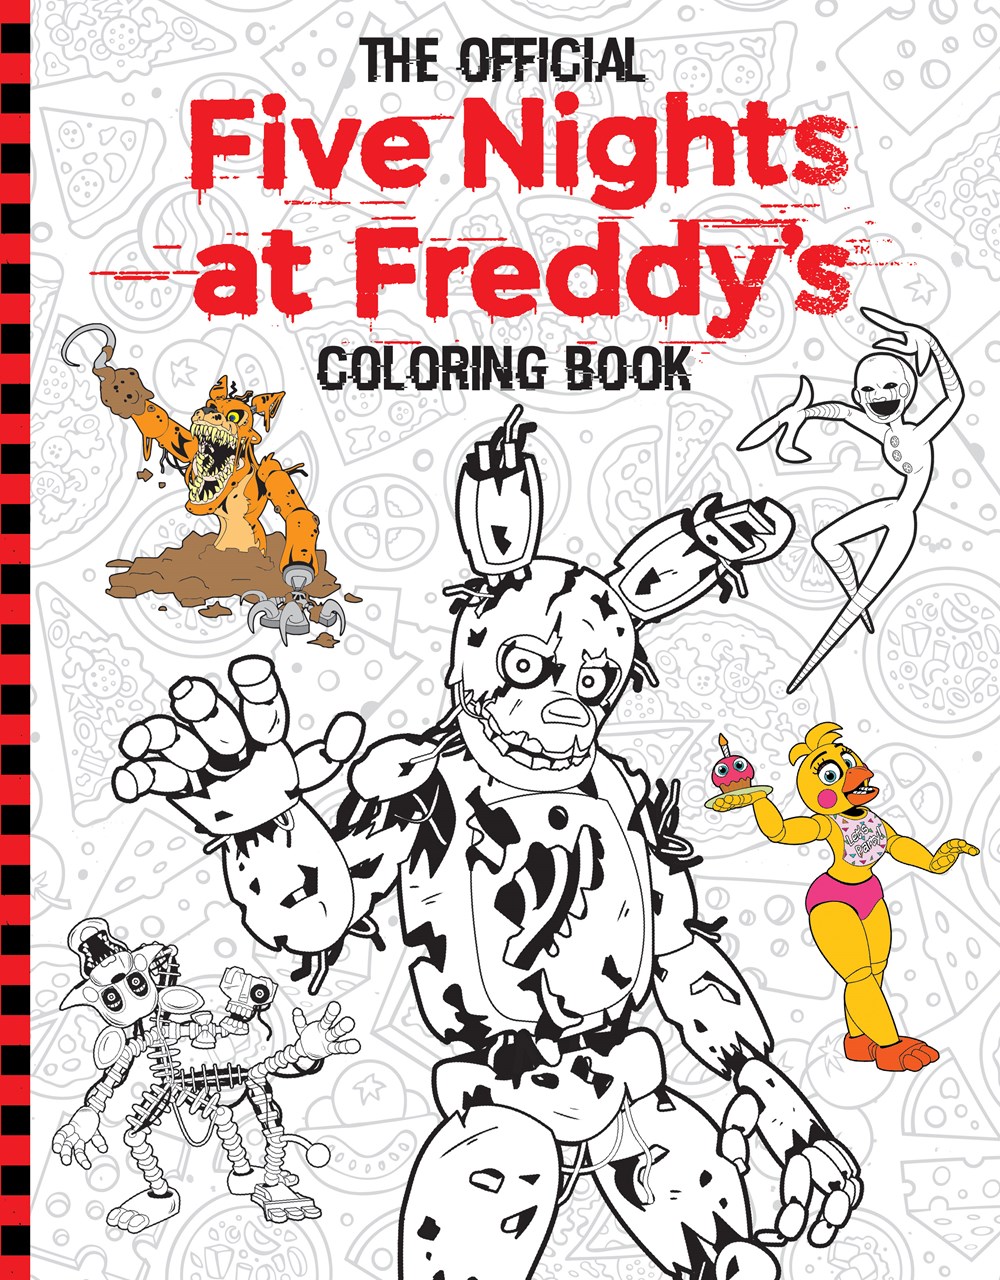 Five Nights at Freddy's Coloring Book Five Nights at Freddy's Wiki